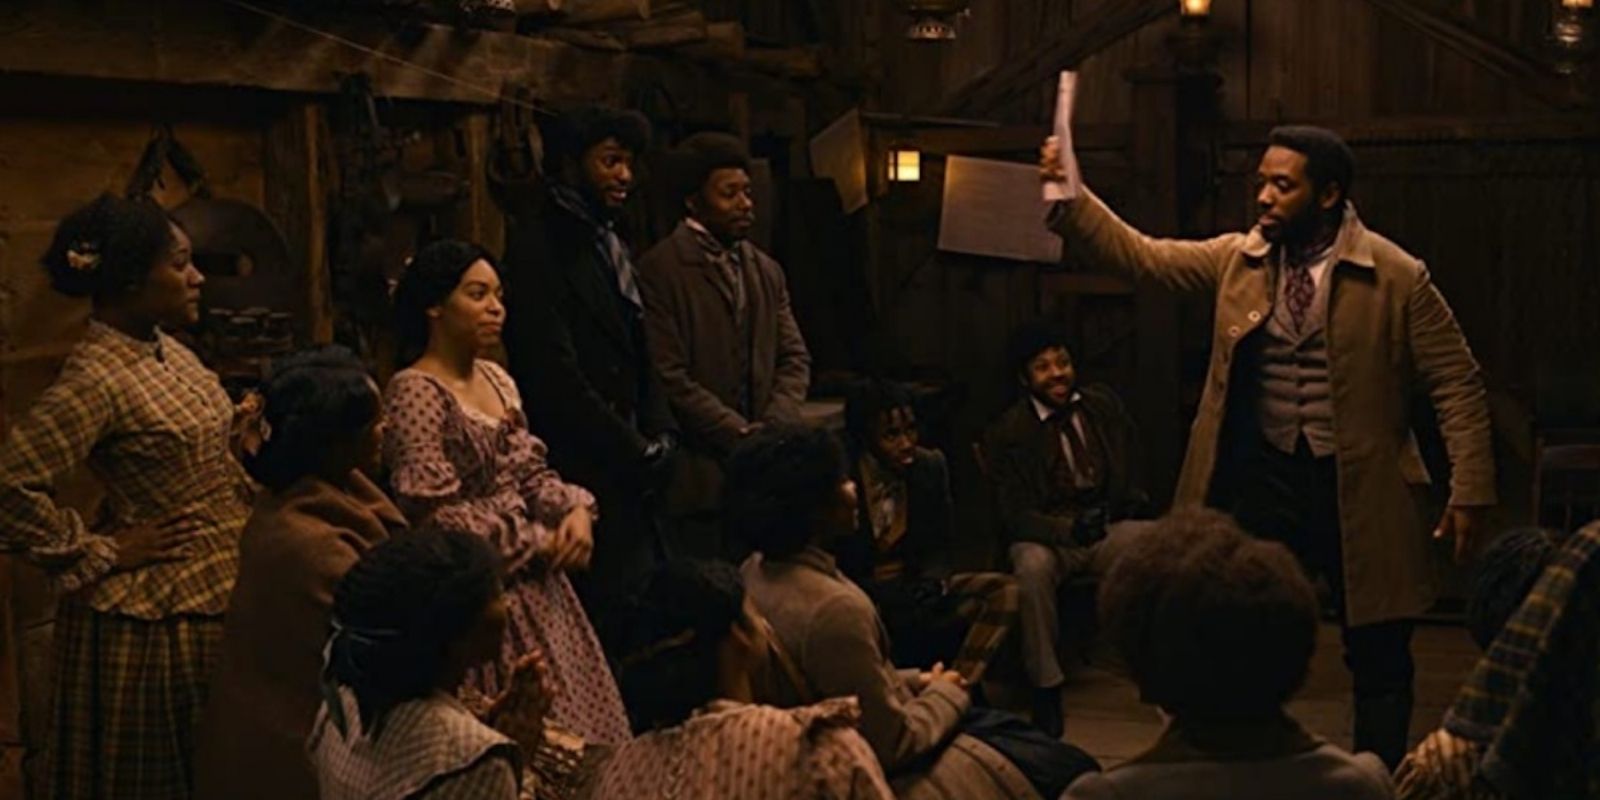 Henry leads a meeting of his abolitionist newspaper in Dickinson Season 2